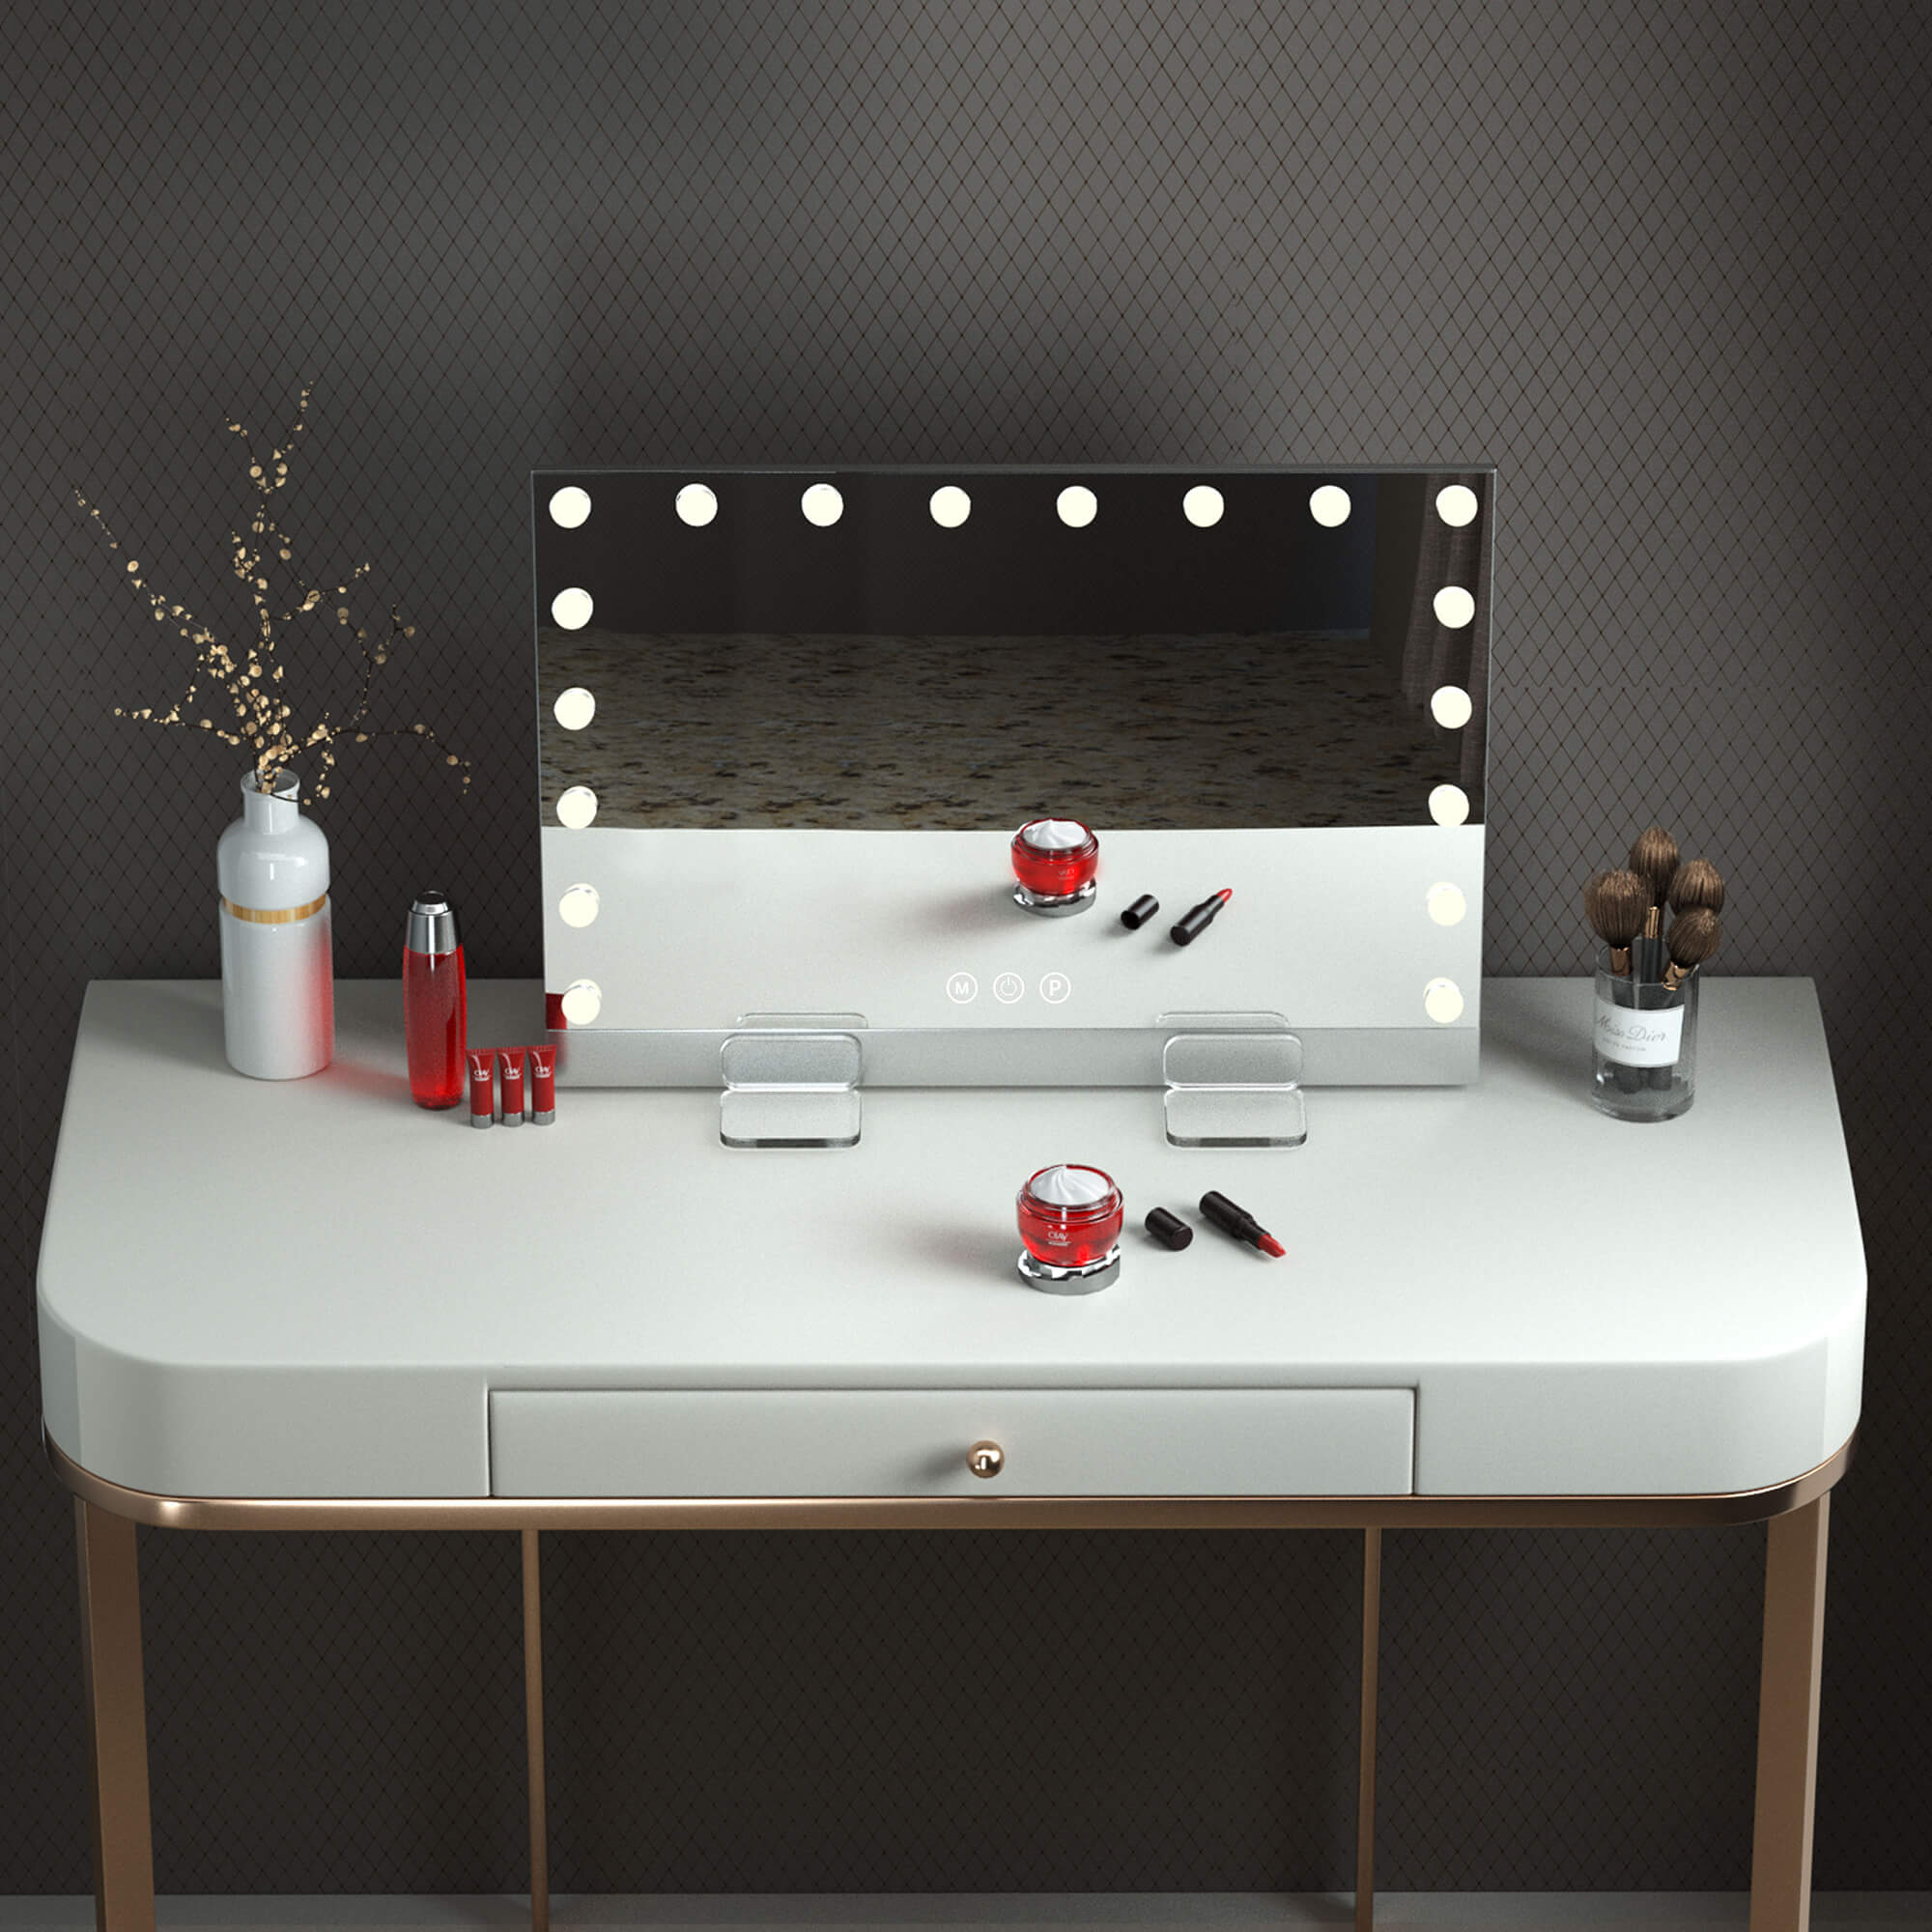 Athena- 31"x 23" Ultra Thin Dimmable Cosmetic Lighted Hollywood Vanity Mirror